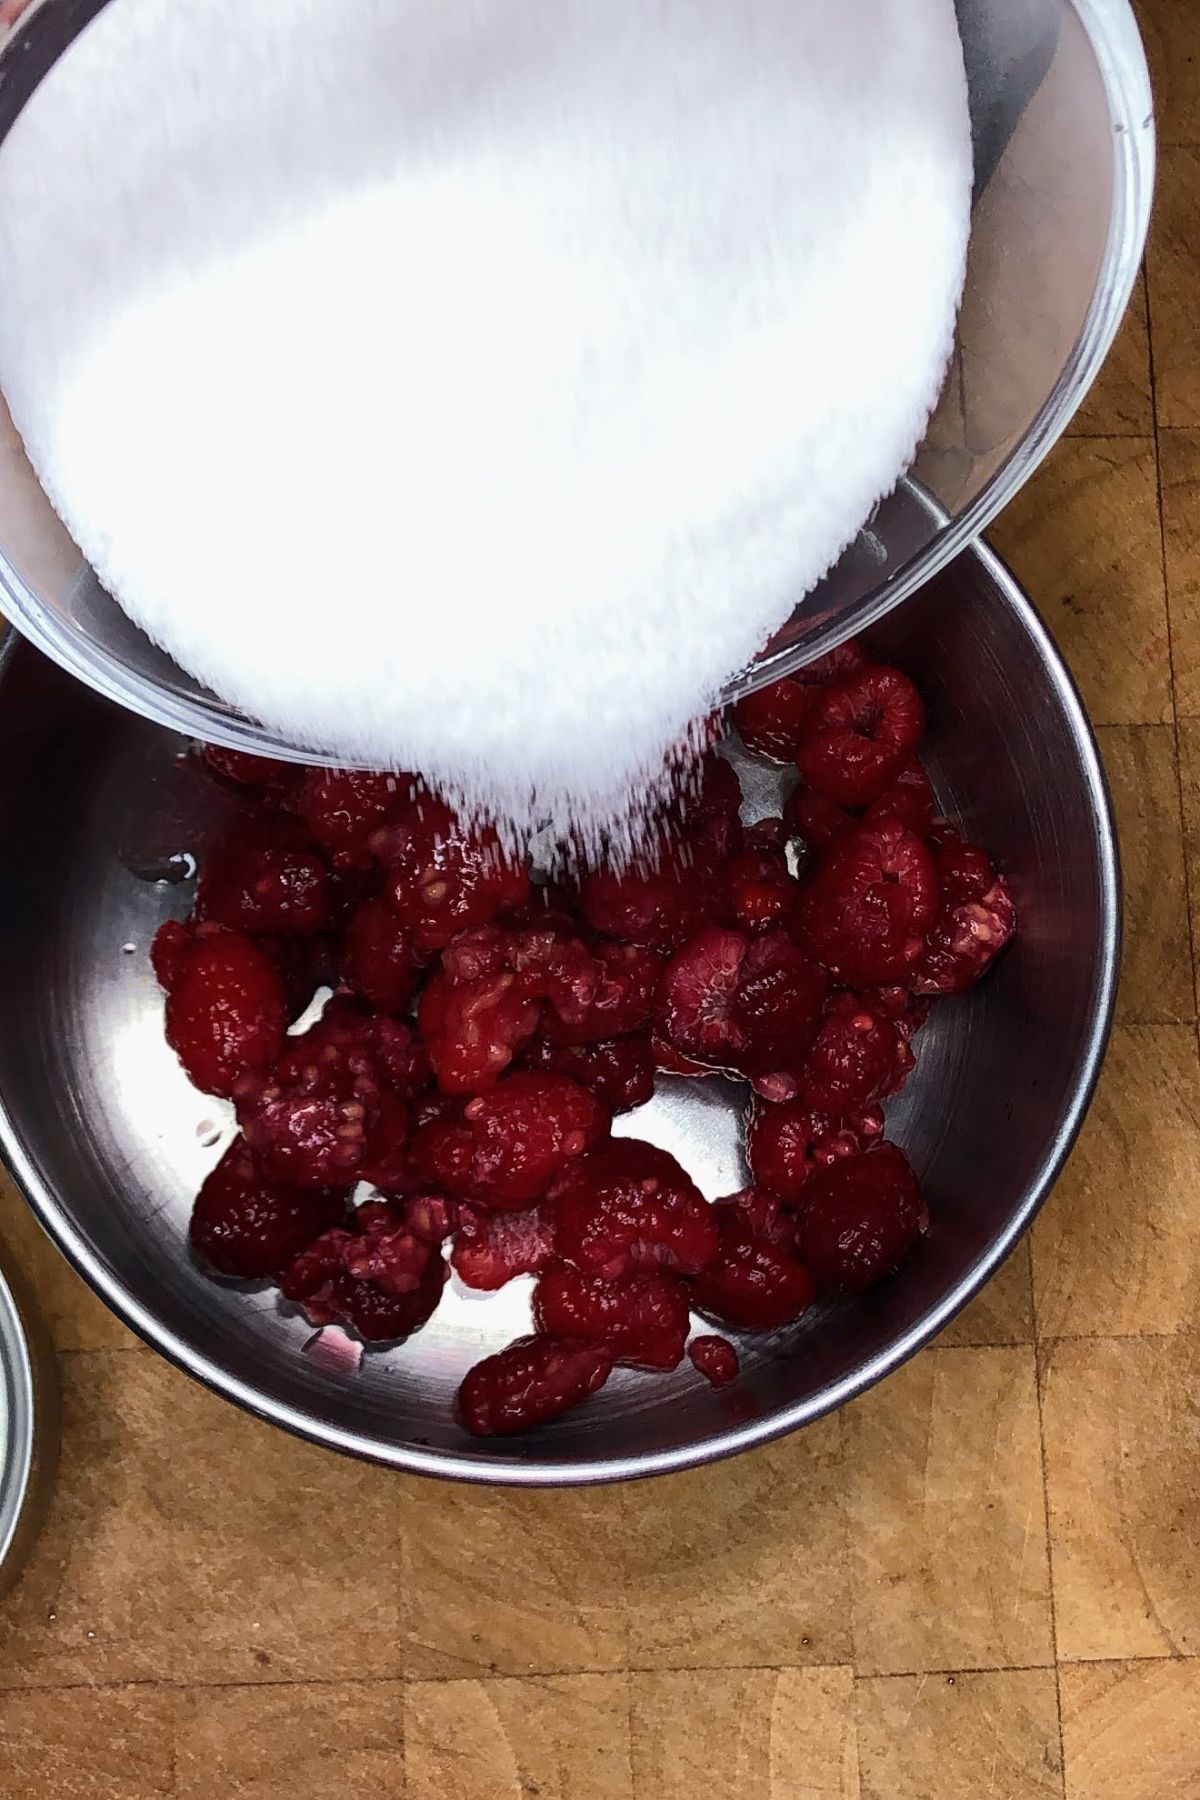 Pouring sugar into a saucepan with raspberries.